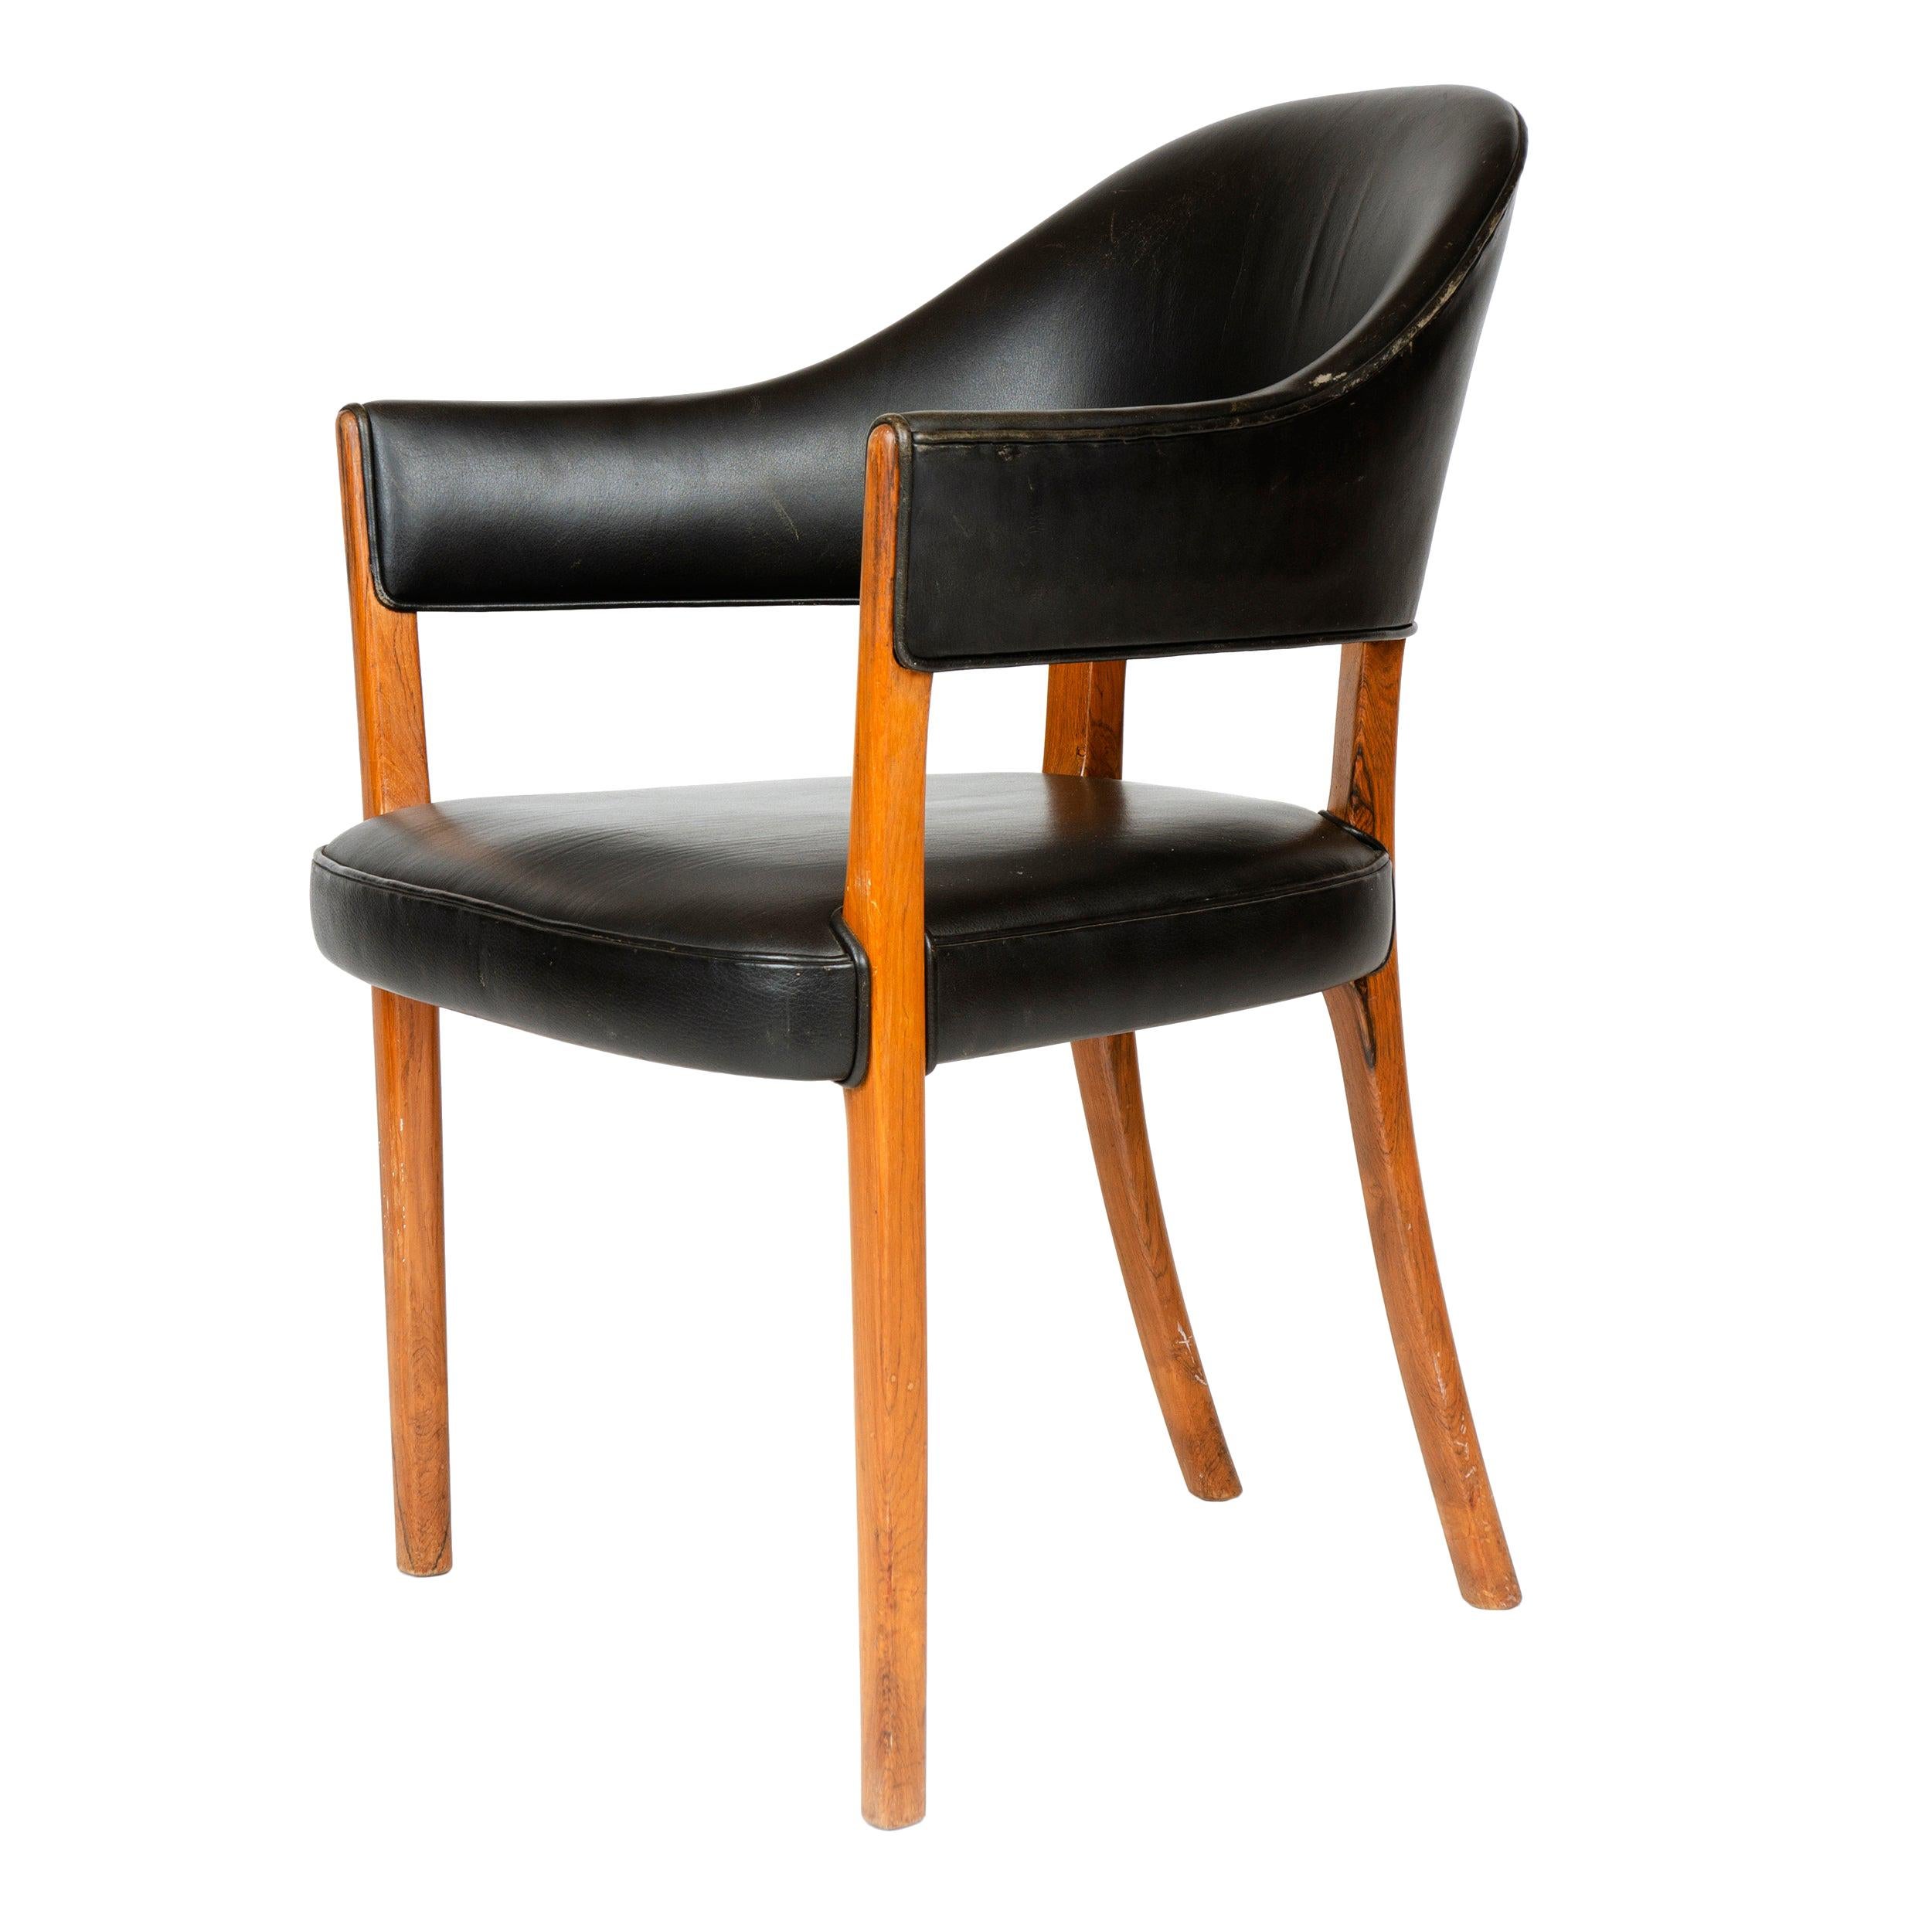 1950s Danish Rosewood Humpback Armchair by Ole Wanscher for A. J. Iversen